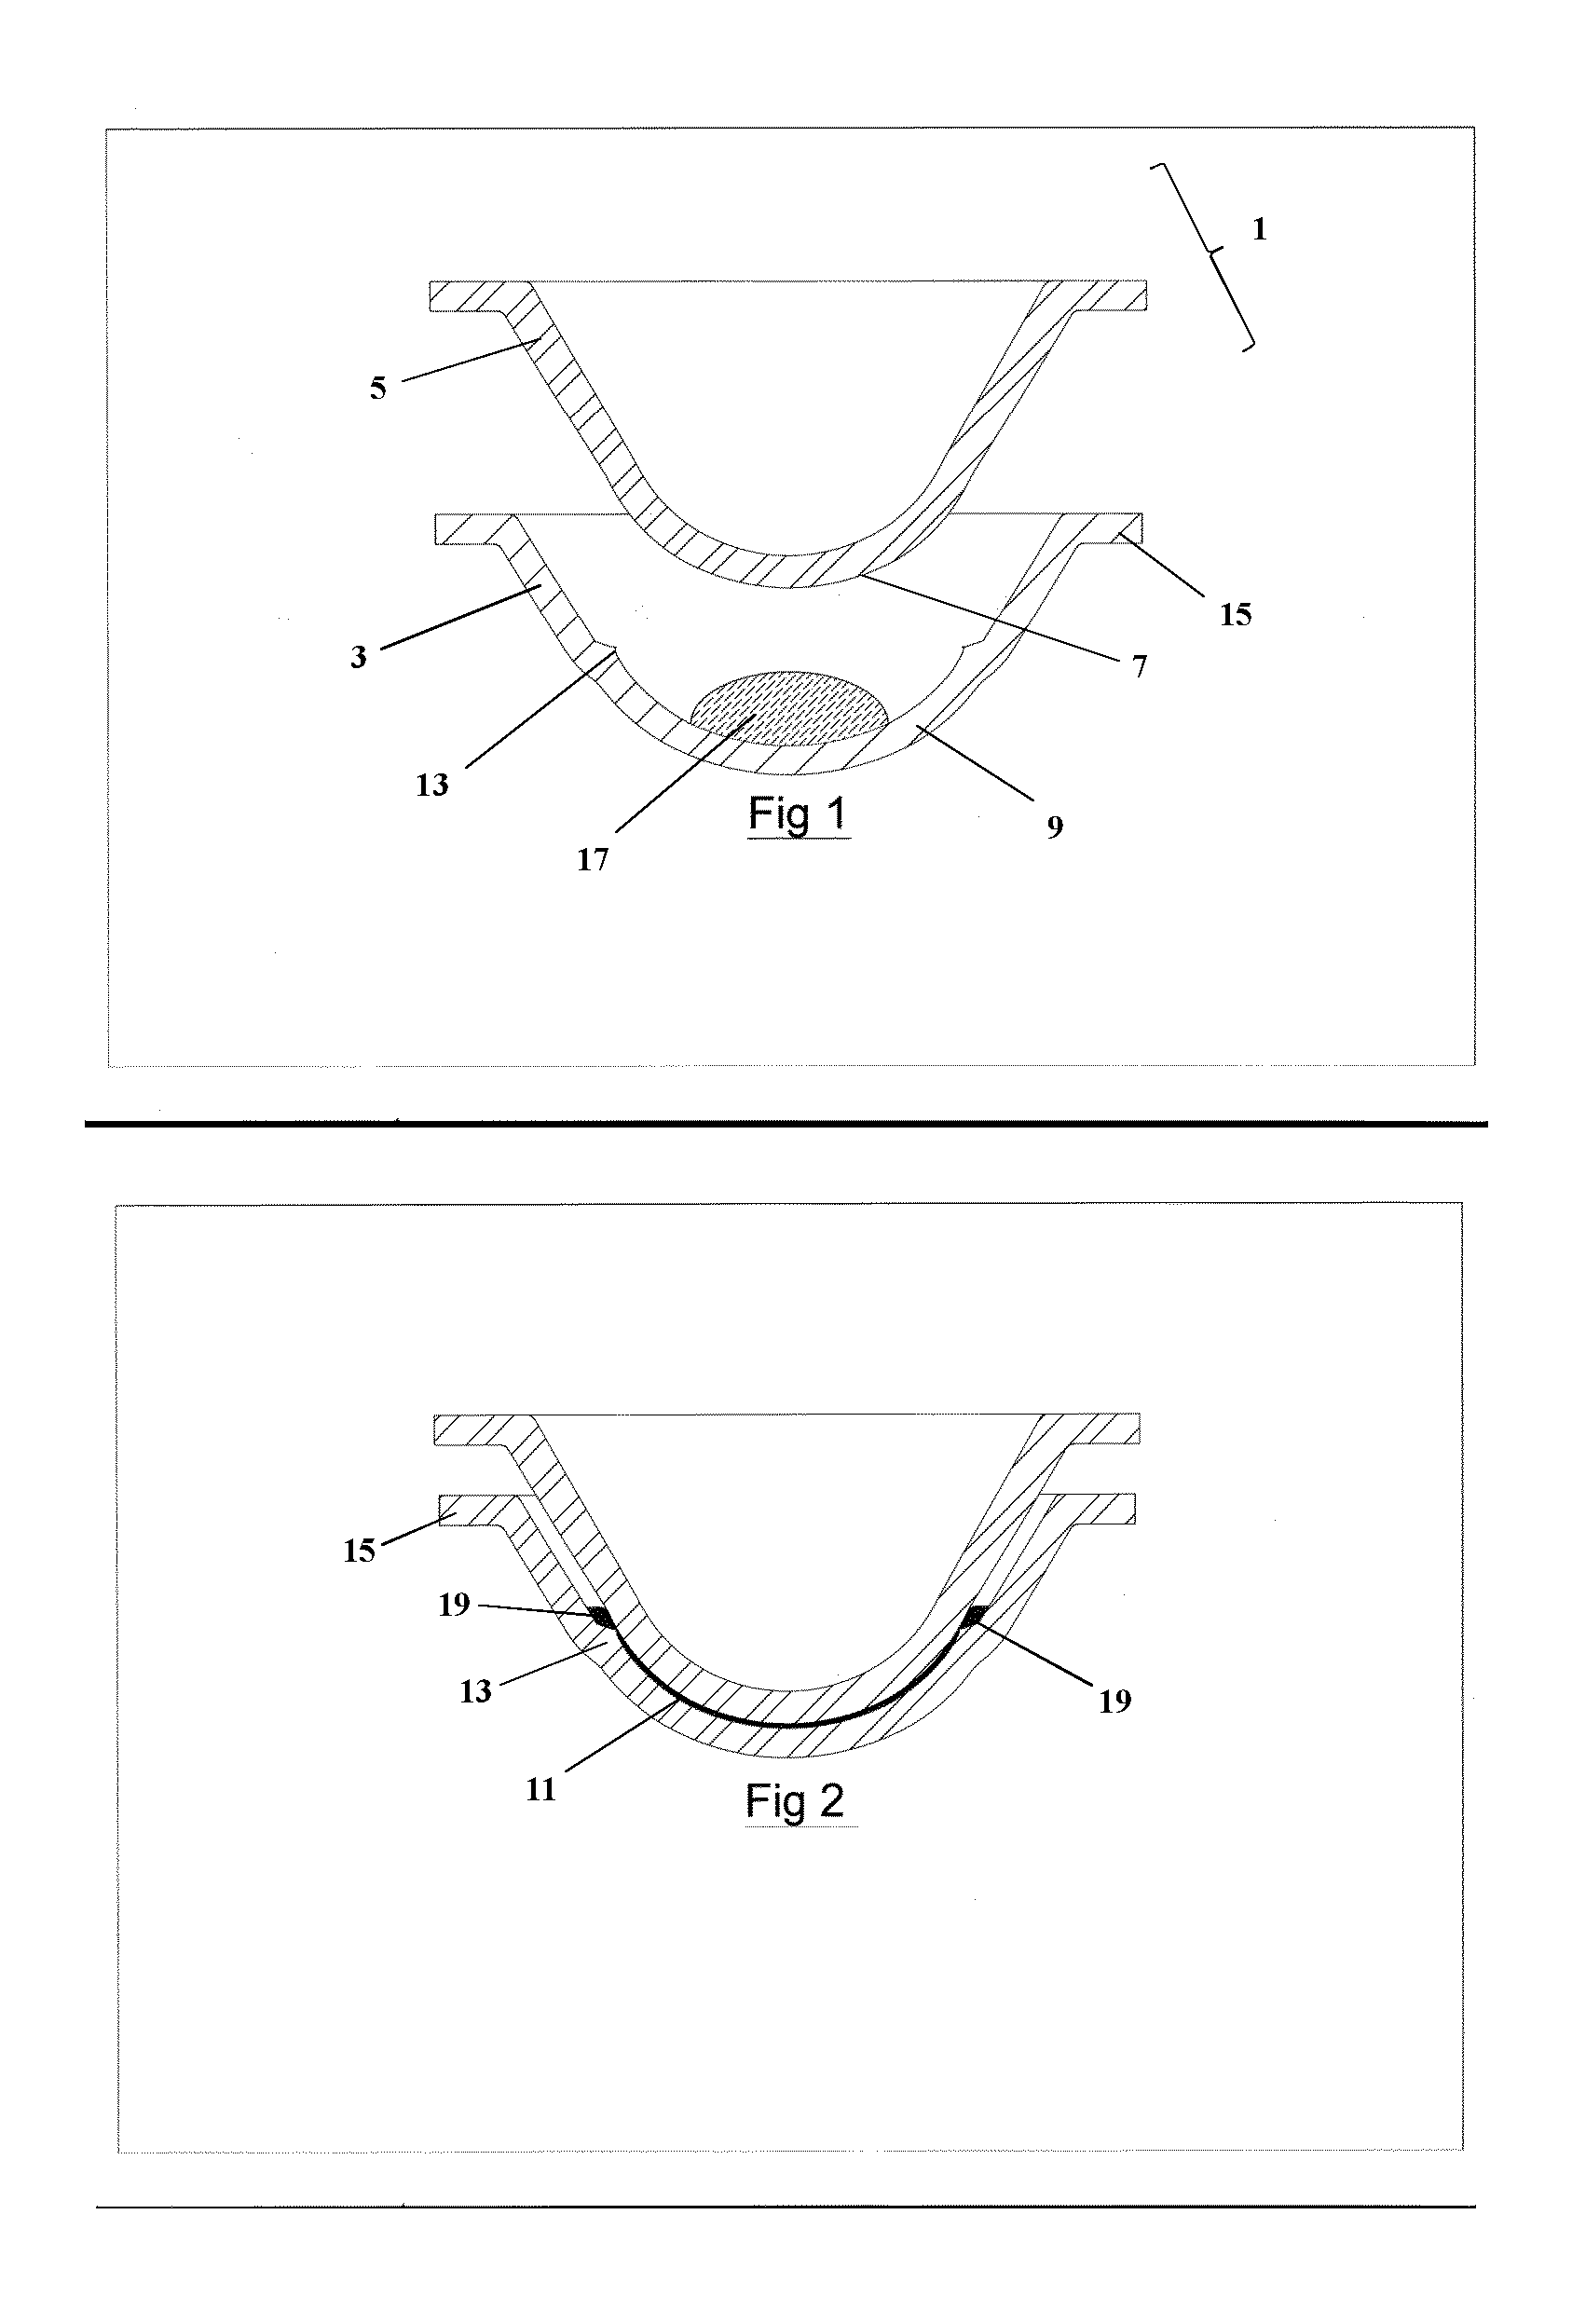 Contact lens manufacturing method